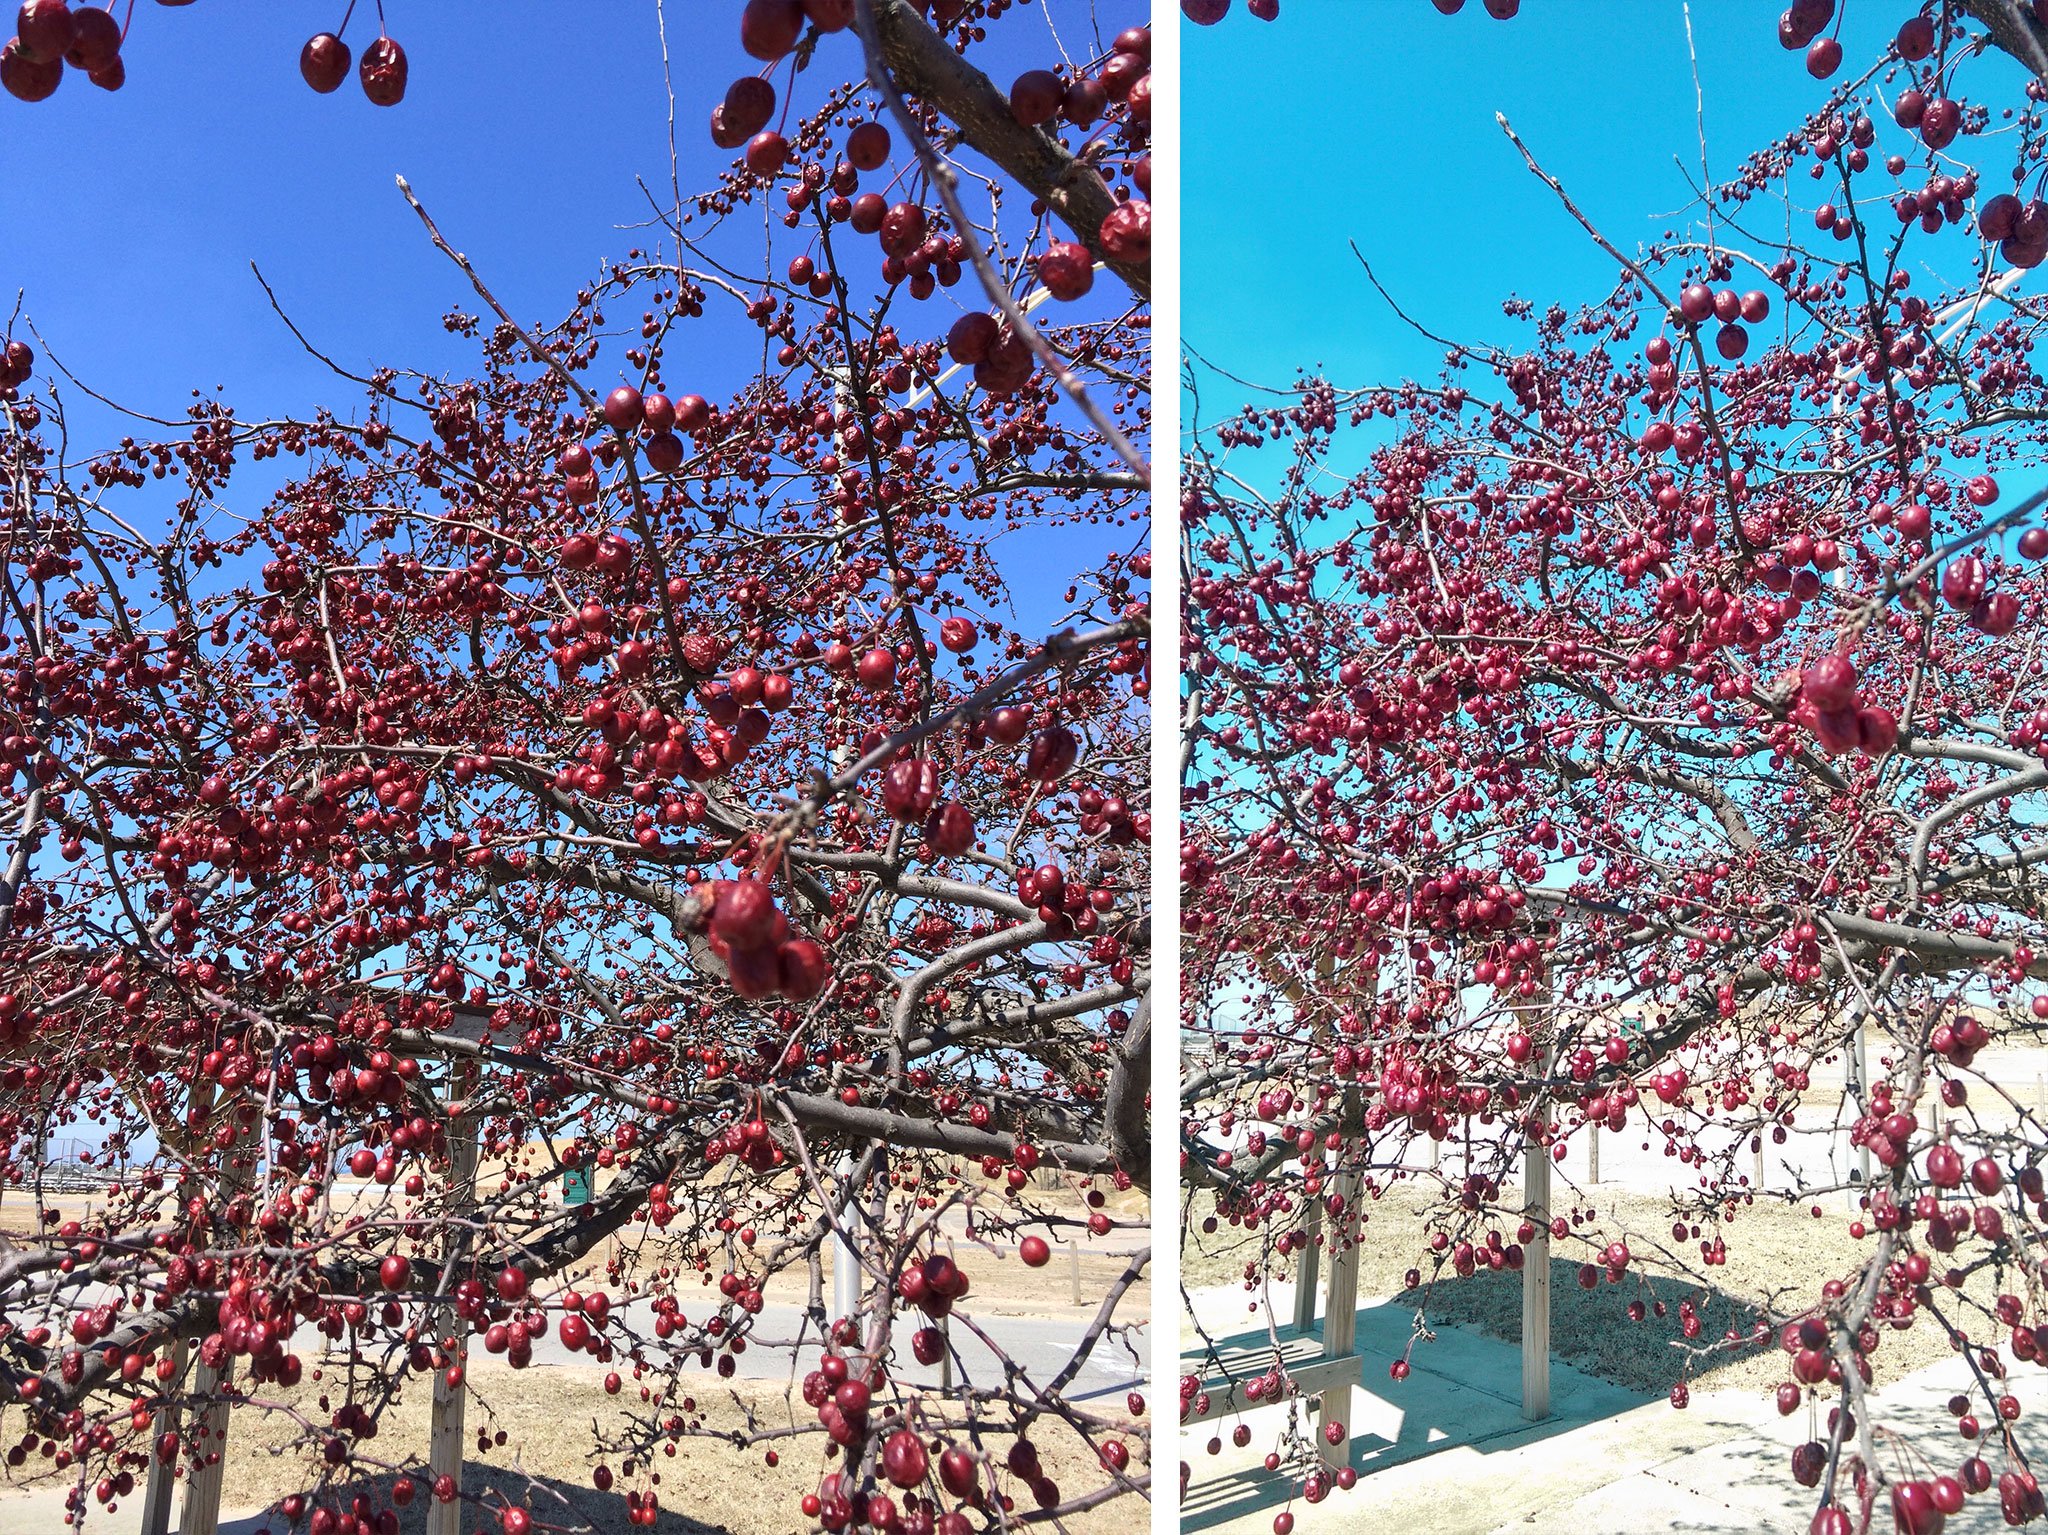 HTC One M8 vs. iPhone 5s: HDR